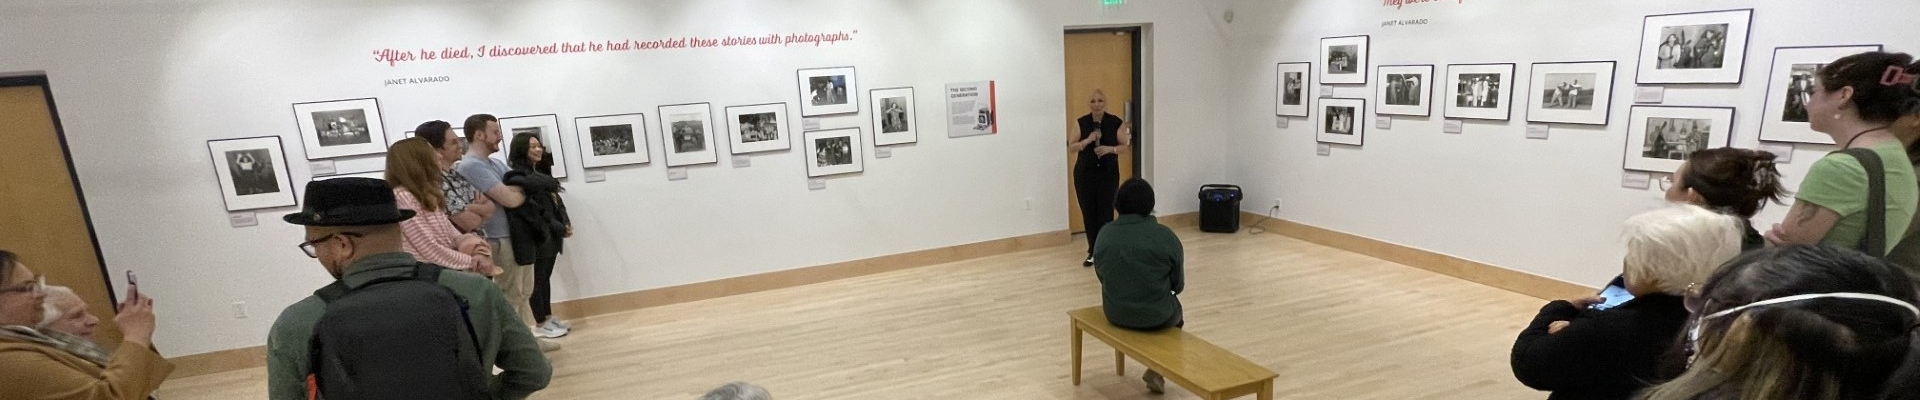 a group of people in a gallery listen to Janet Alvarado speaking during an opening reception of her father's photography